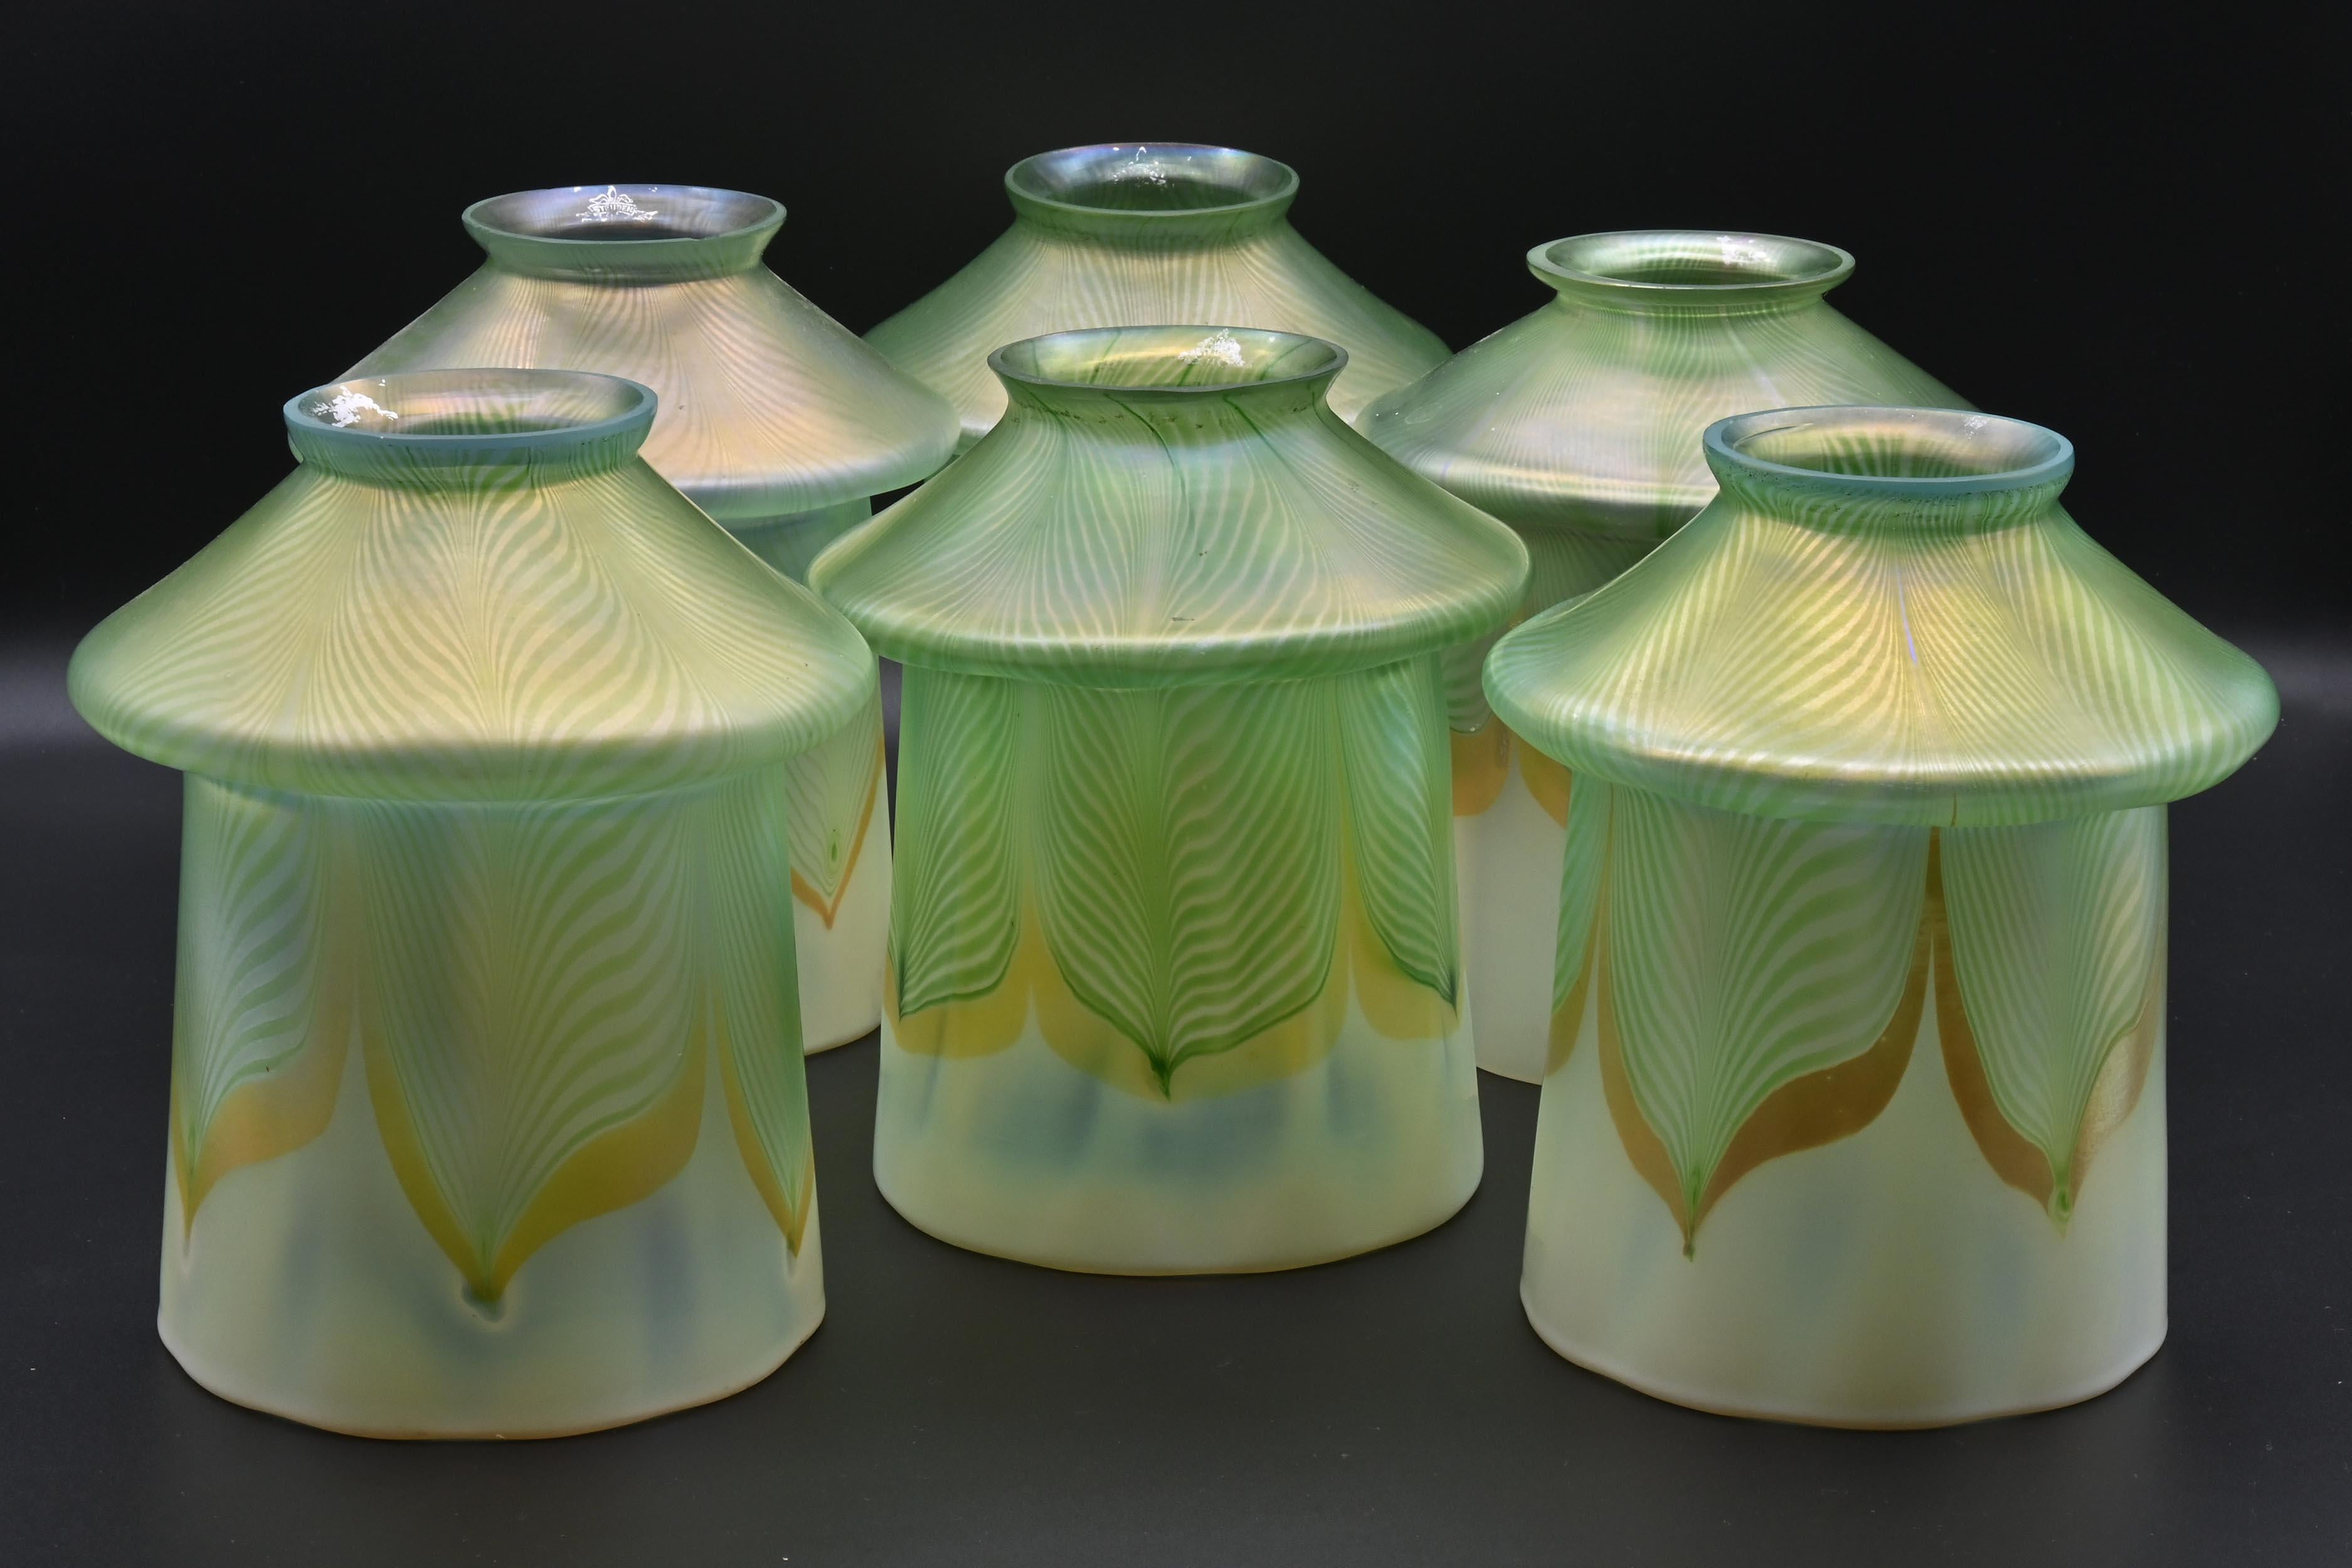 Steuben iridescent green & gold pulled feather 
Pattern 2327 from Carder Catalog 1905 

A special mix of glass that can’t be replicated today. 
Each shade was hand blown by up to six skilled artisans per shade.

Sold Individually 
6